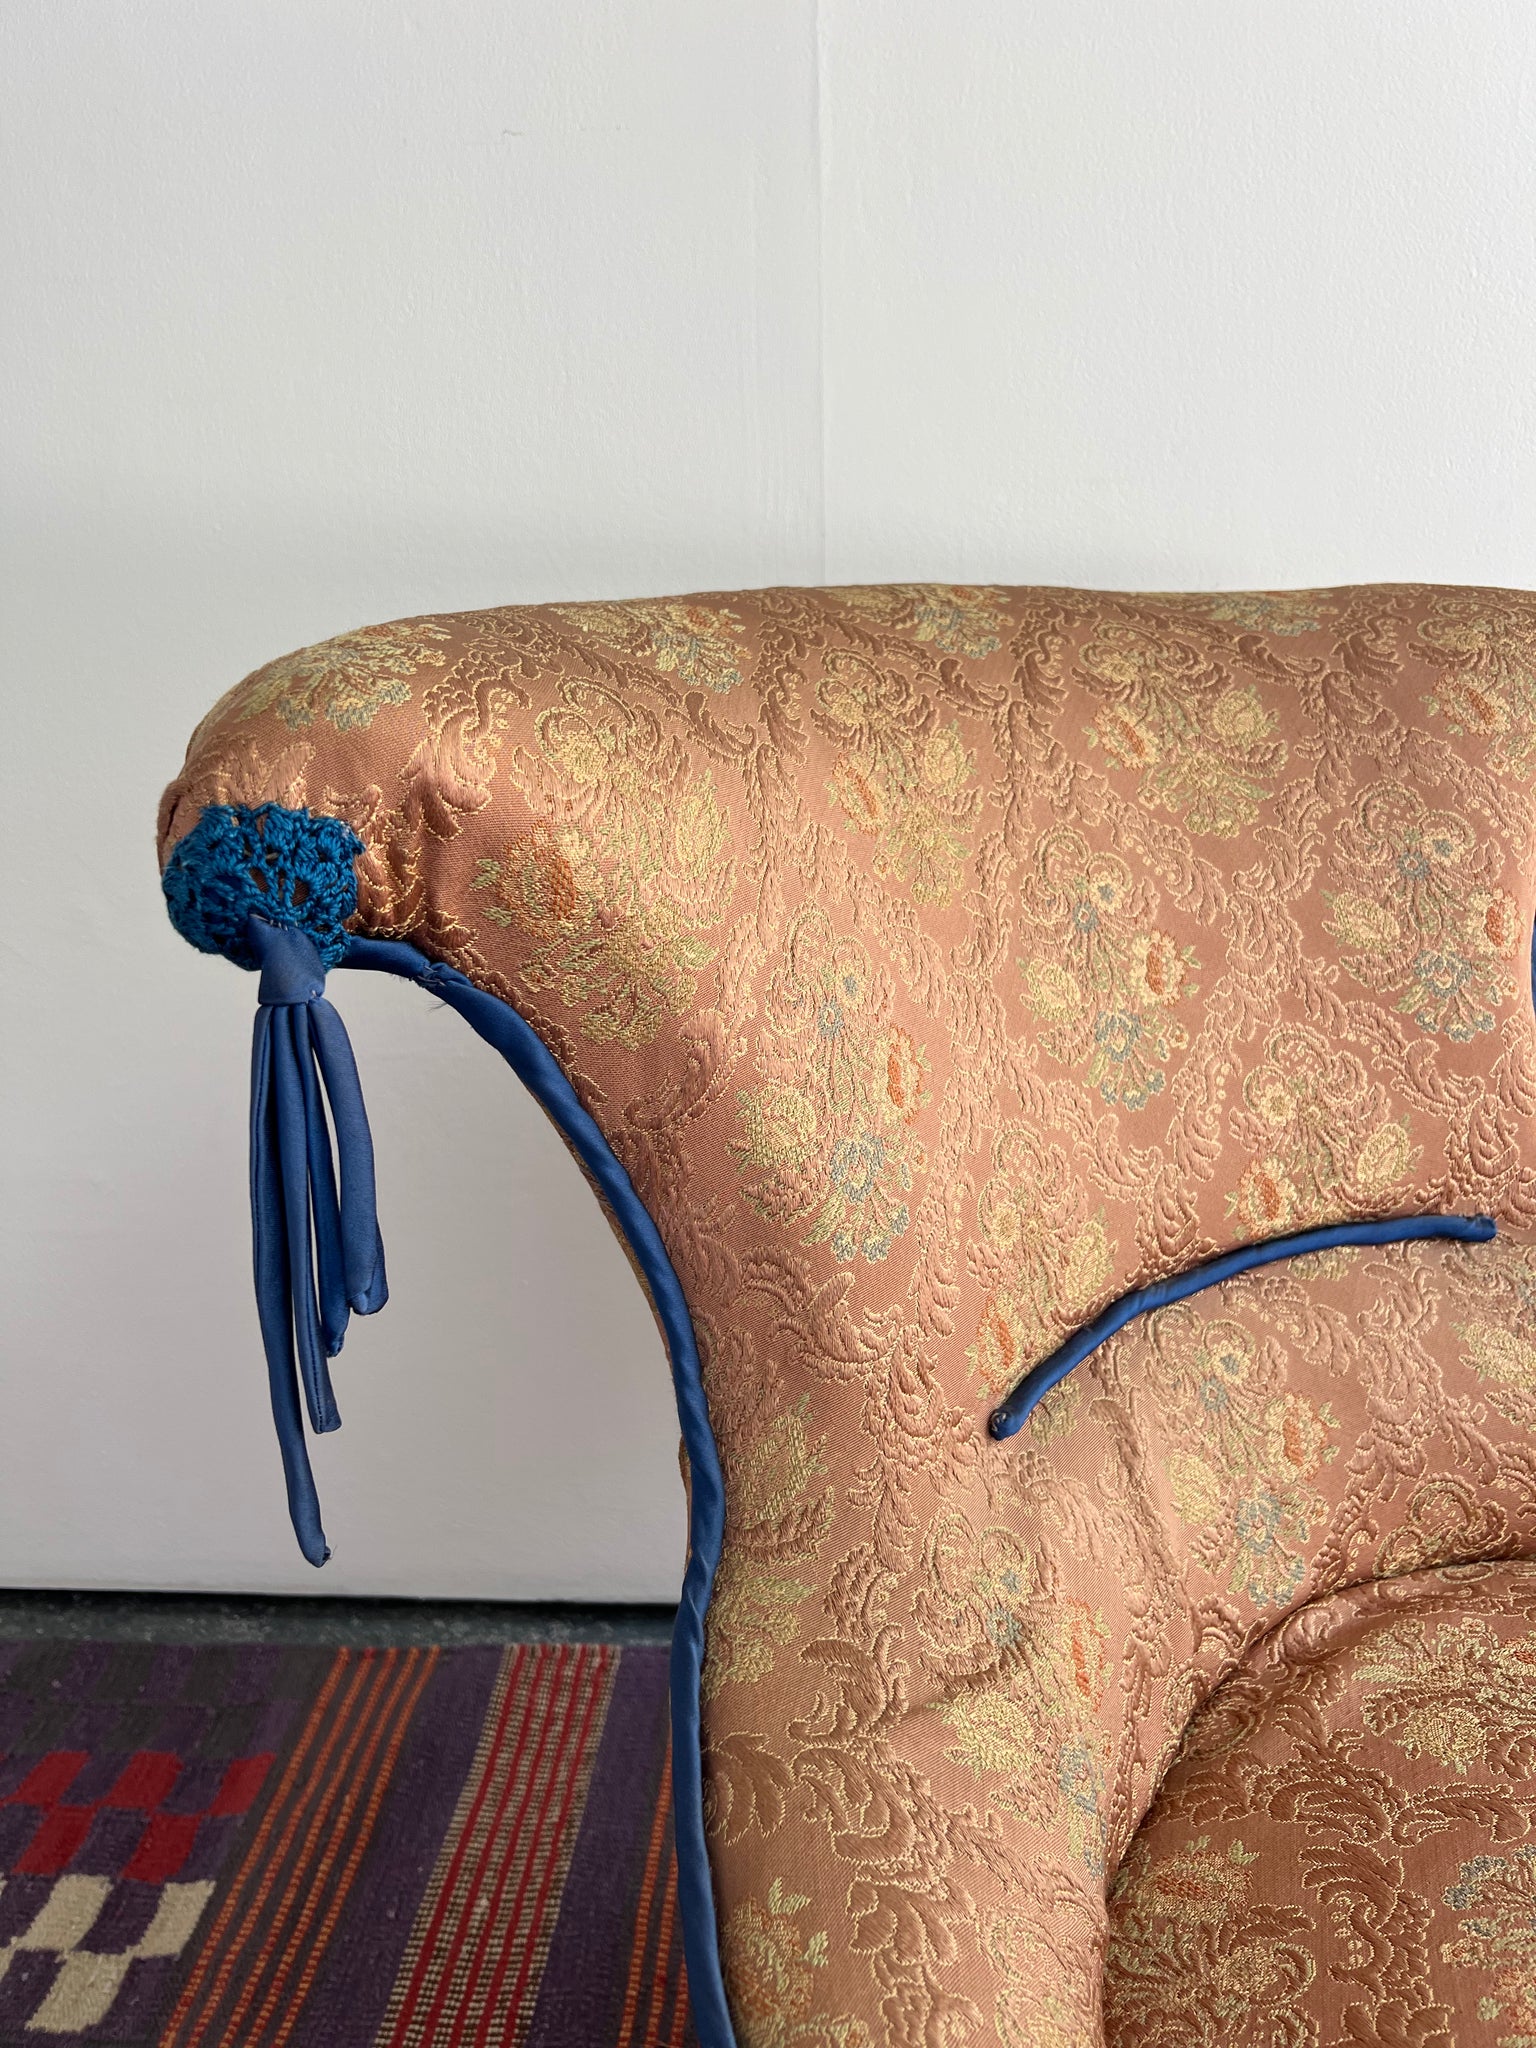 Pink Chinoiserie and Blue Tassle Slipper Chair